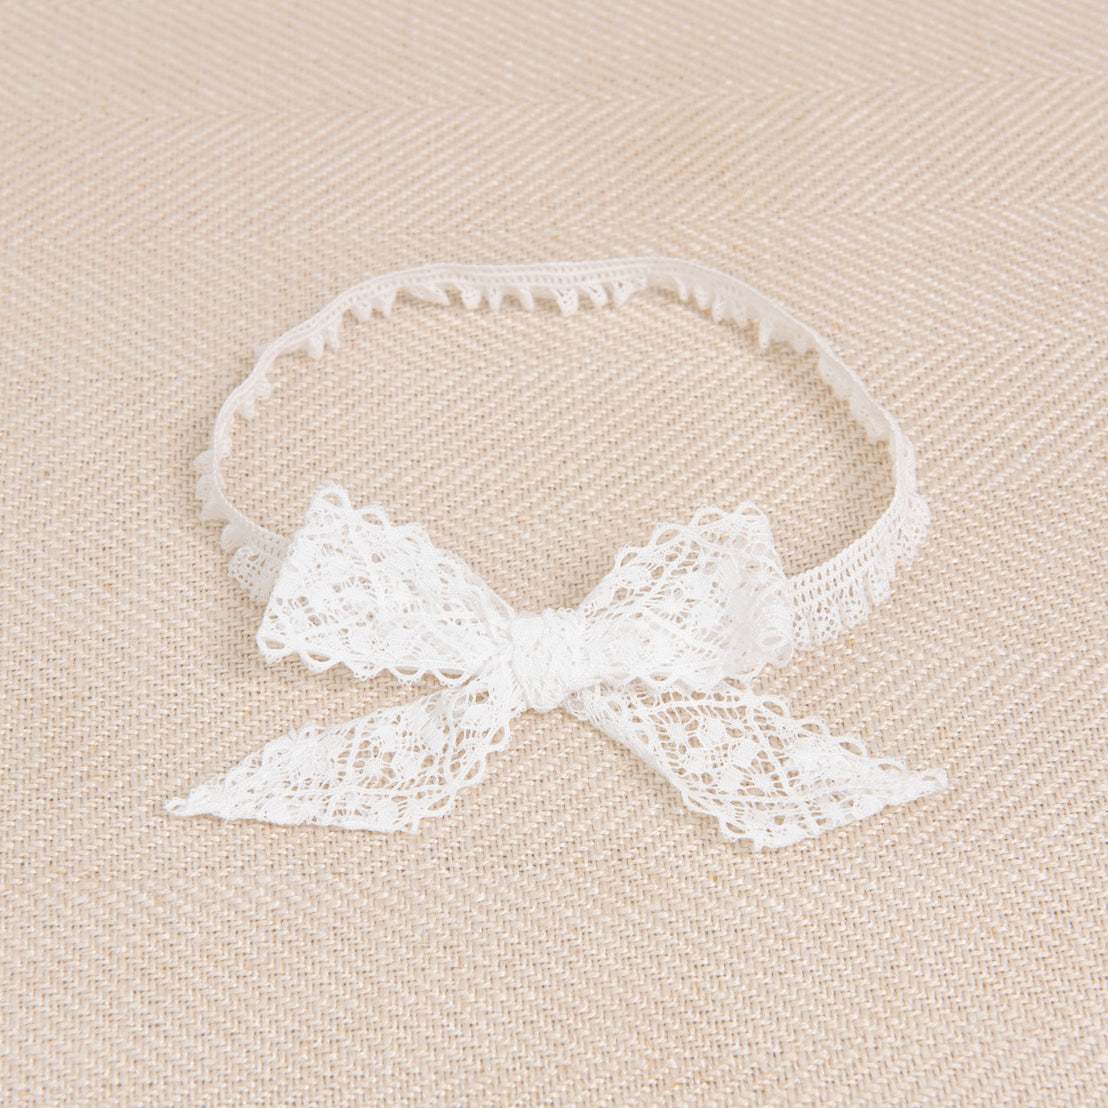 A Thea Lace Headband, a delicate lace bow with light ivory stretch lace, displayed on a textured beige fabric background.